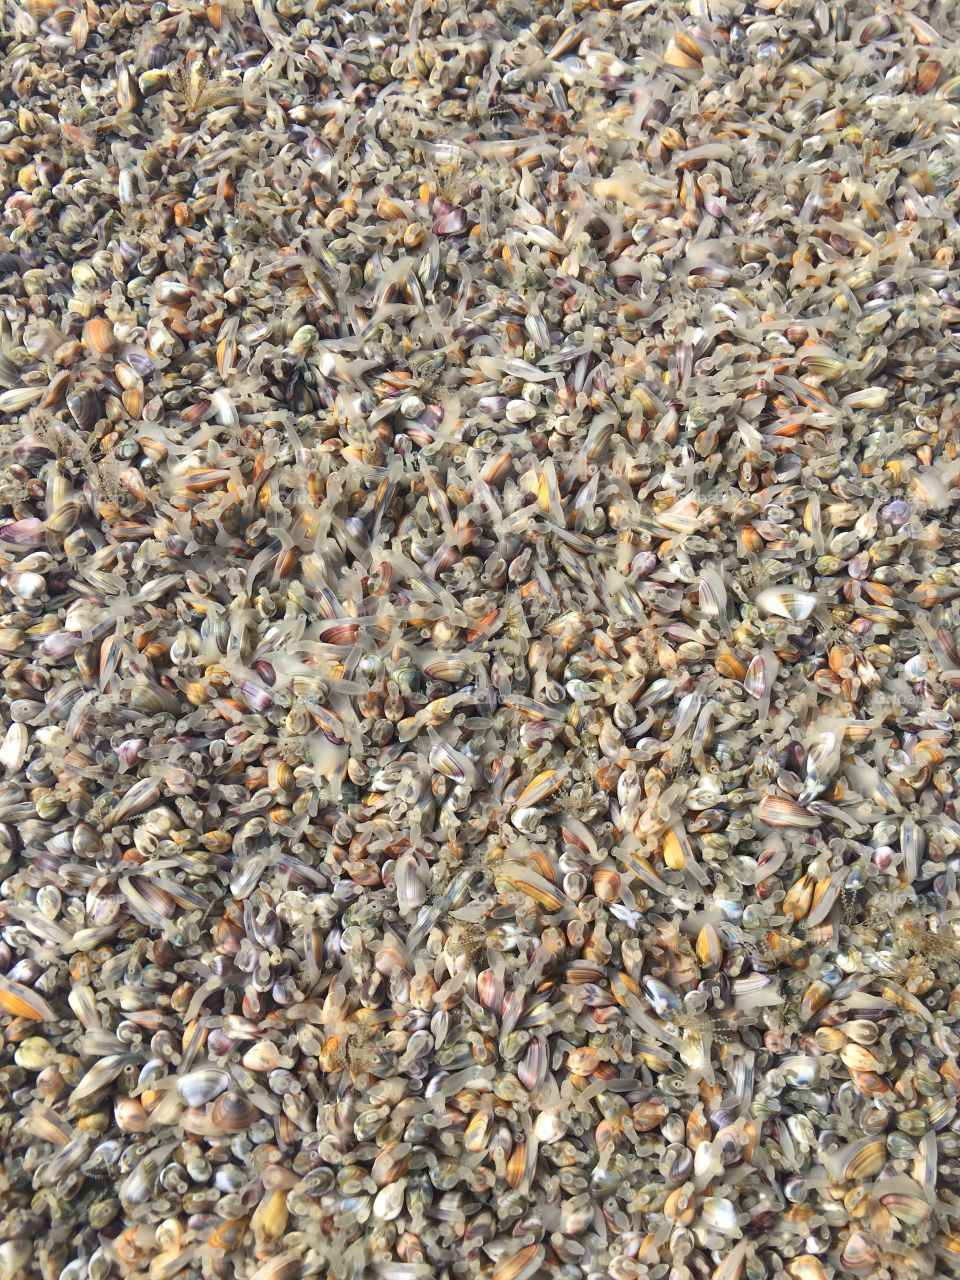 Hundreds of clams on the shore